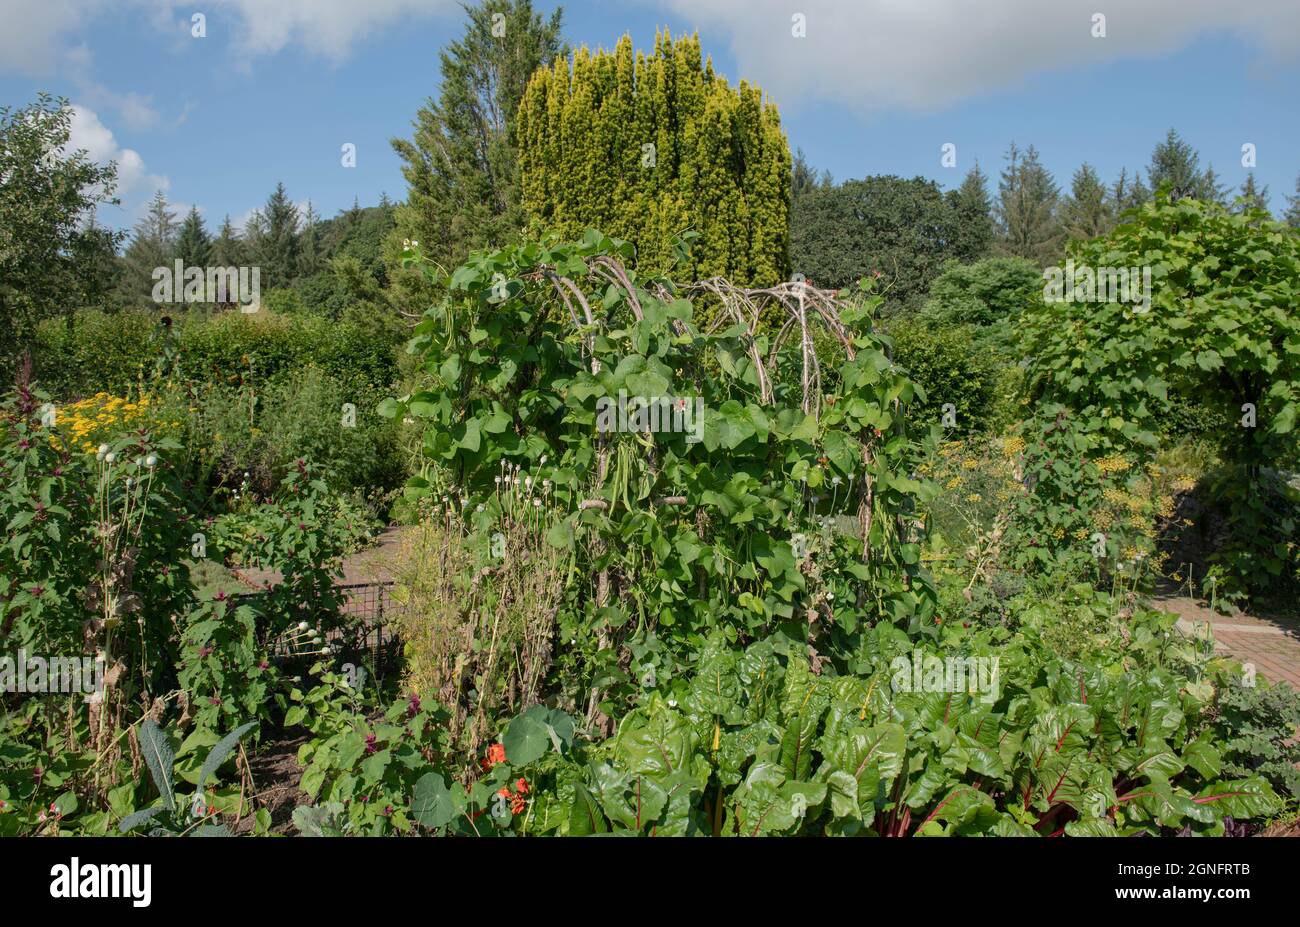 Summer Landscape of Home Grown Organic Vegetables and Flowering Plants with a Hazel Stick Wigwam Growing in a Potager or Kitchen Garden at Rosemoor Stock Photo